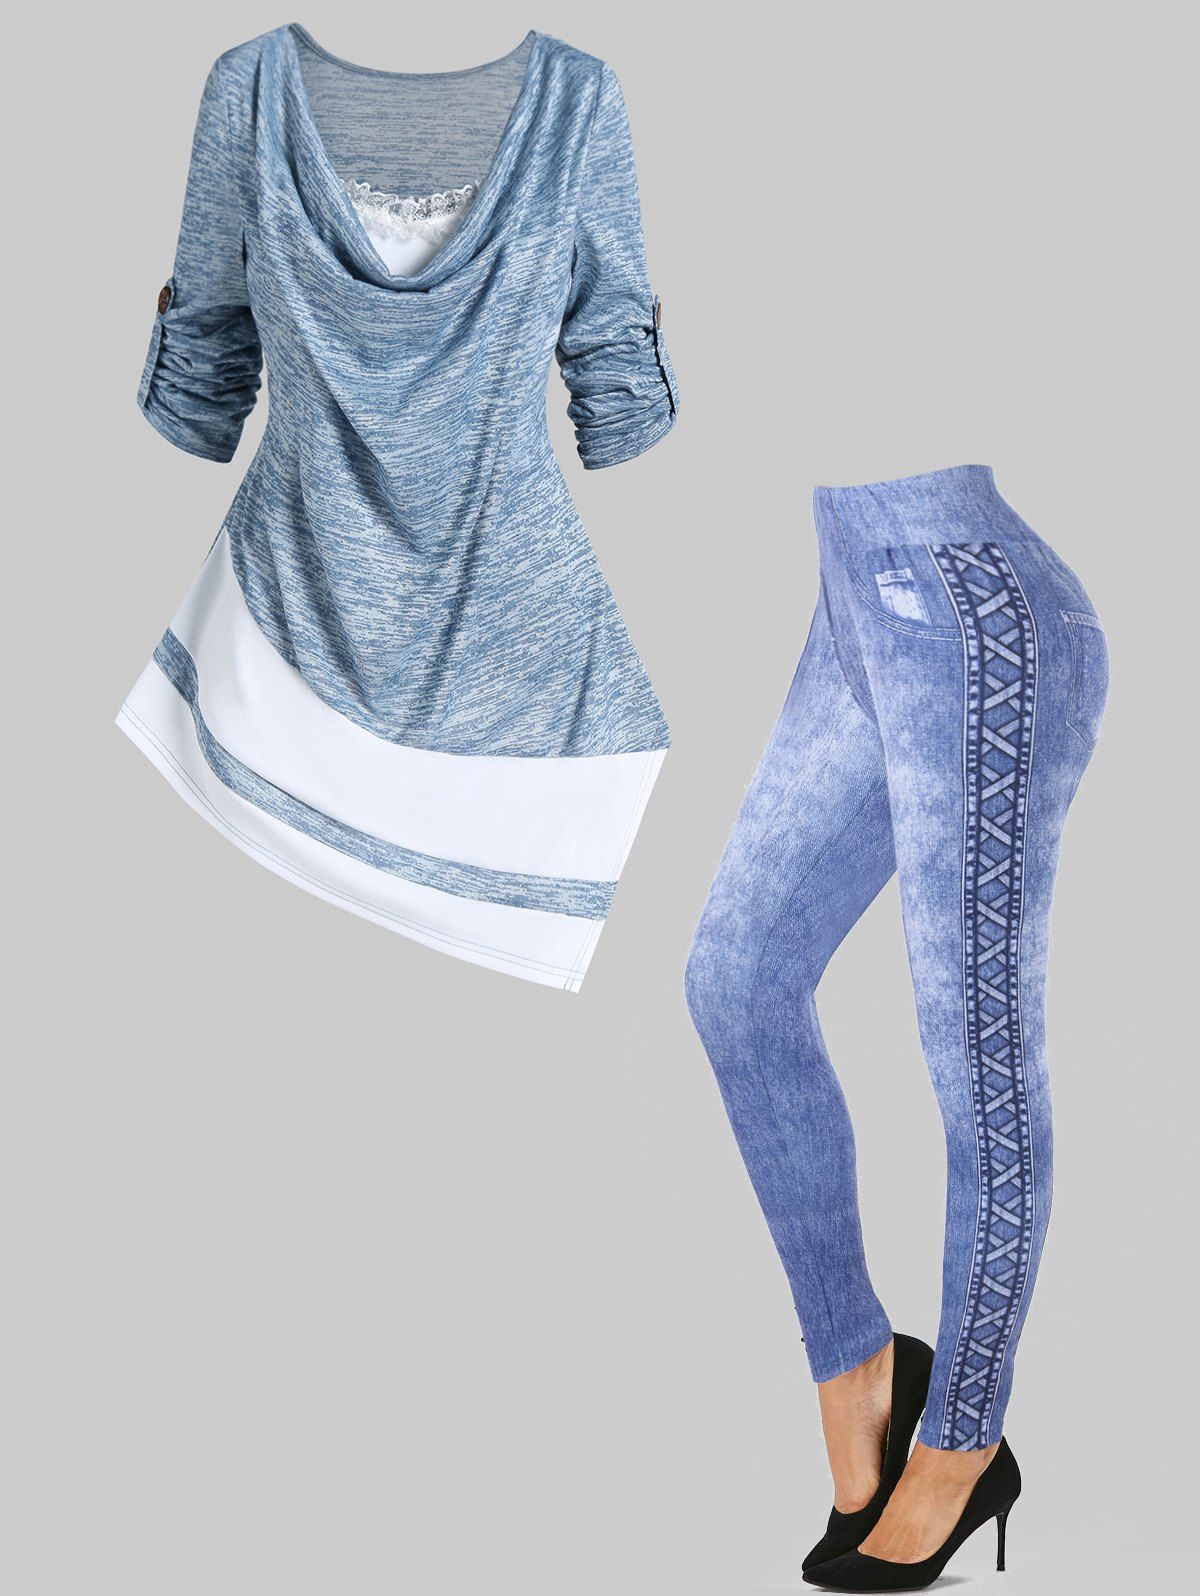 Colorblock Space Dye Print Asymmetric Cowl Collar Lace Ruffled T Shirt And 3D Faux Denim Print Skinny Jeggings Outfit - BLUE S